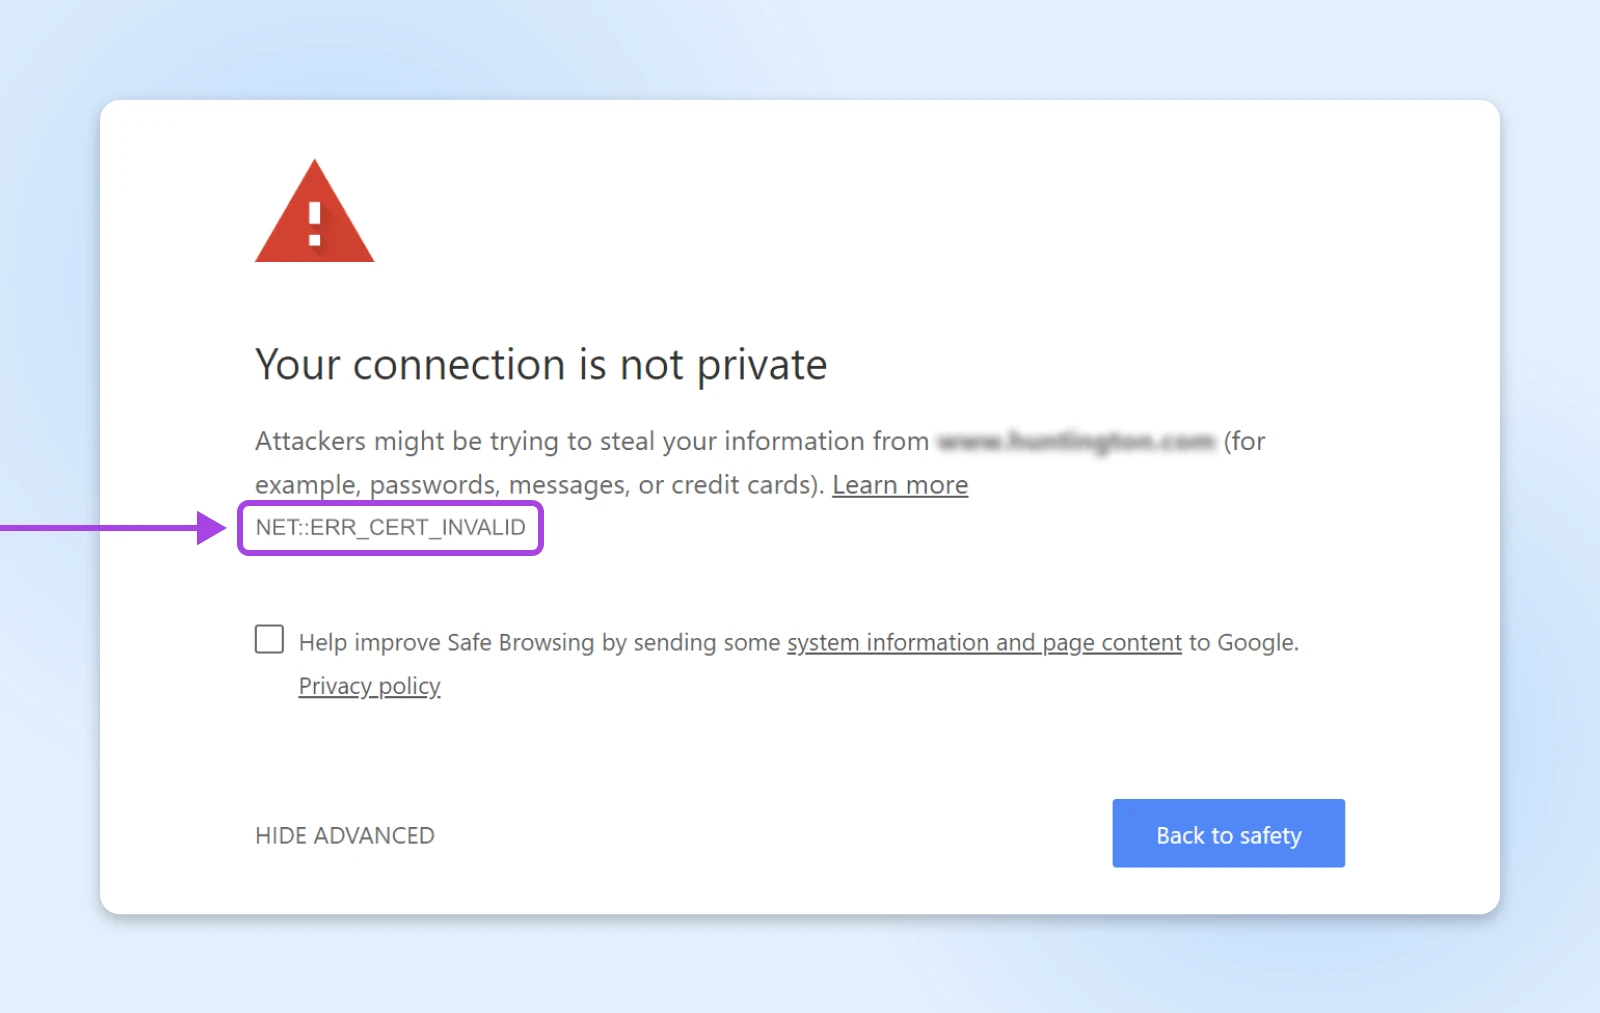 The same "Your connection is not private" screen calling out where to find the "NET::ERR_CERT_INVALID" note 